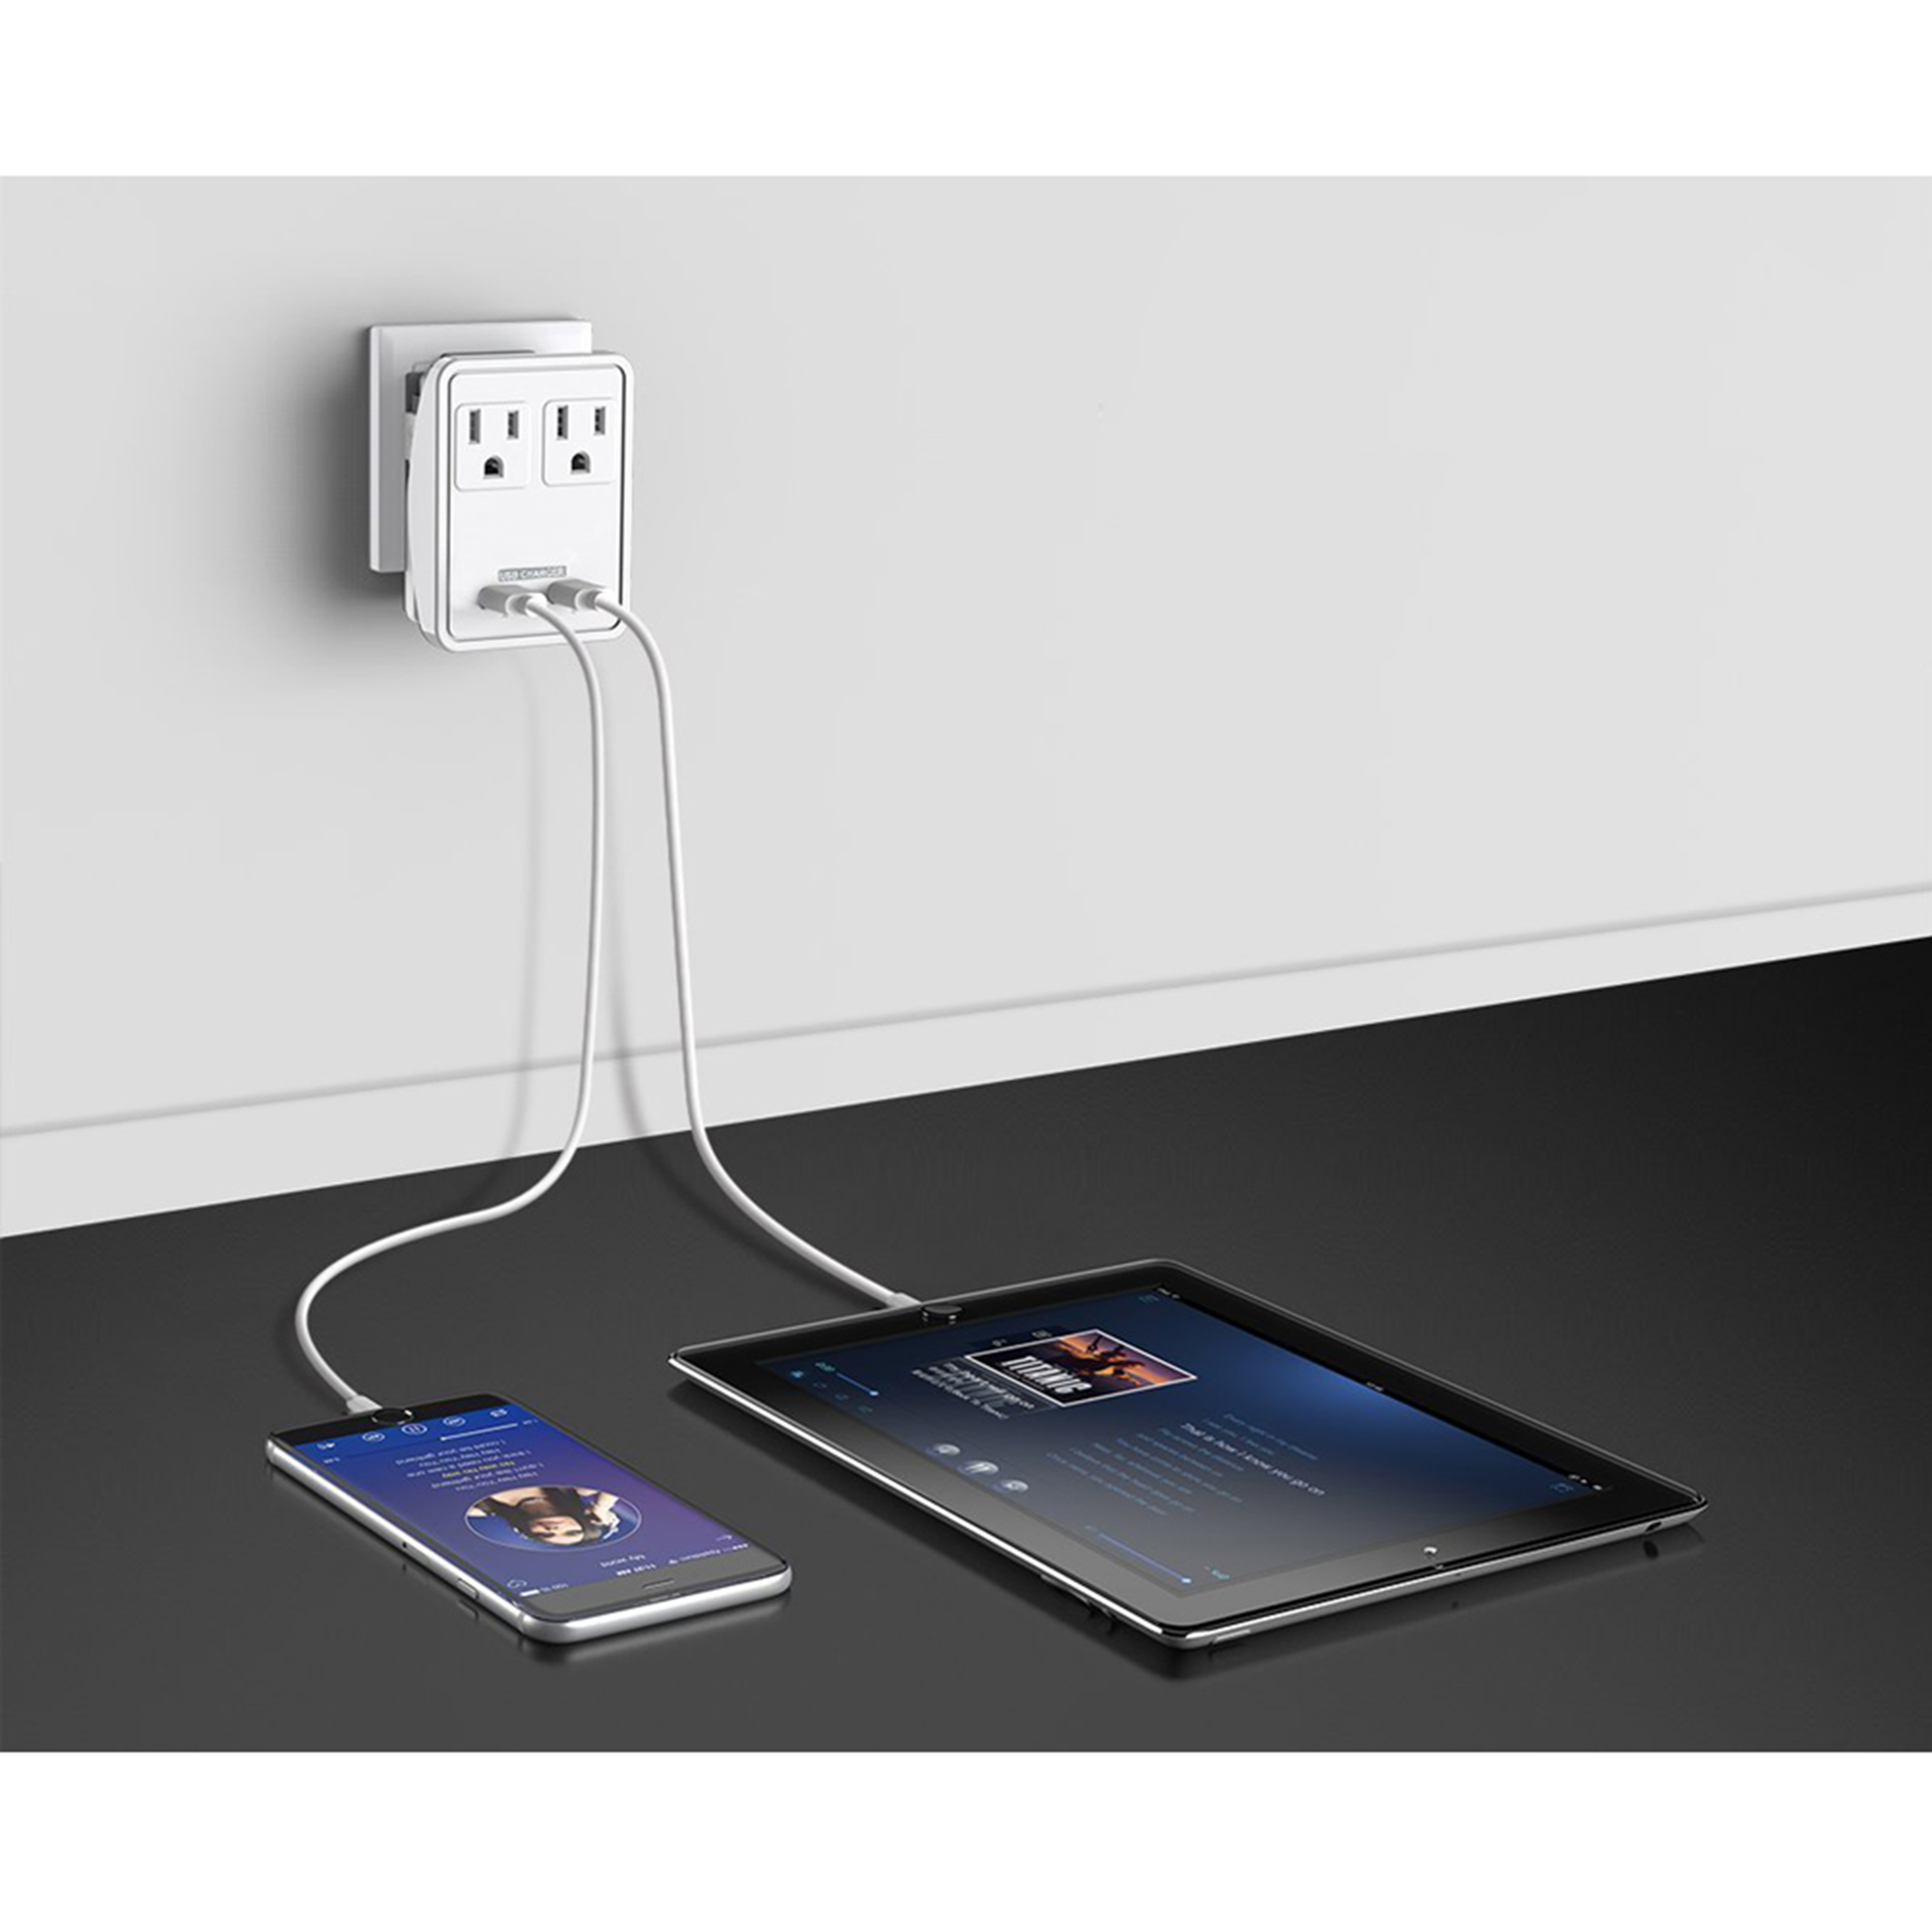 Uninex Compact Travel Wall Charger with 2-Outlet, 2.4A 2-USB, Foldable Plug, Built-in Micro USB Cable, UL Listed - image 3 of 6